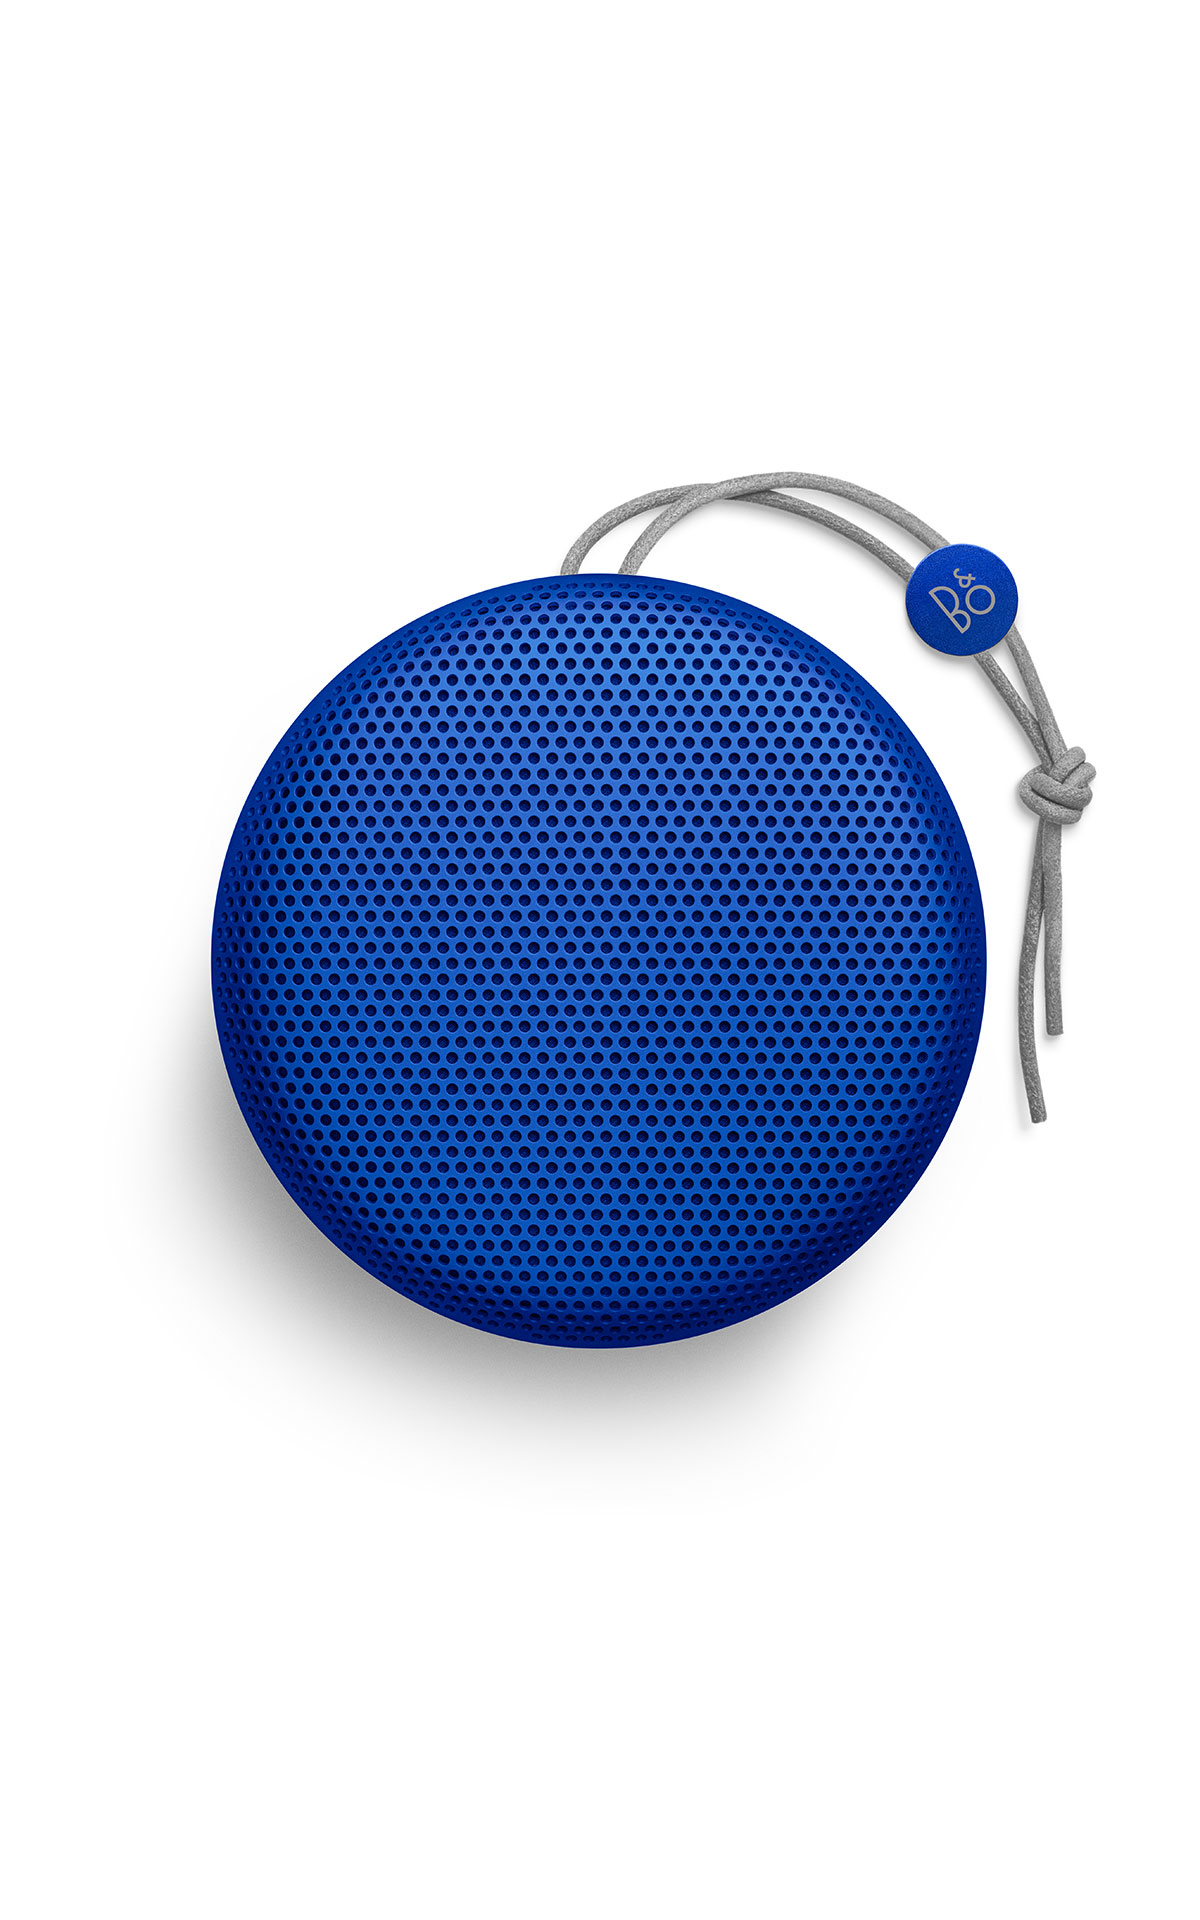 Bang & Olufsen Beoplay A1 blue from Bicester Village